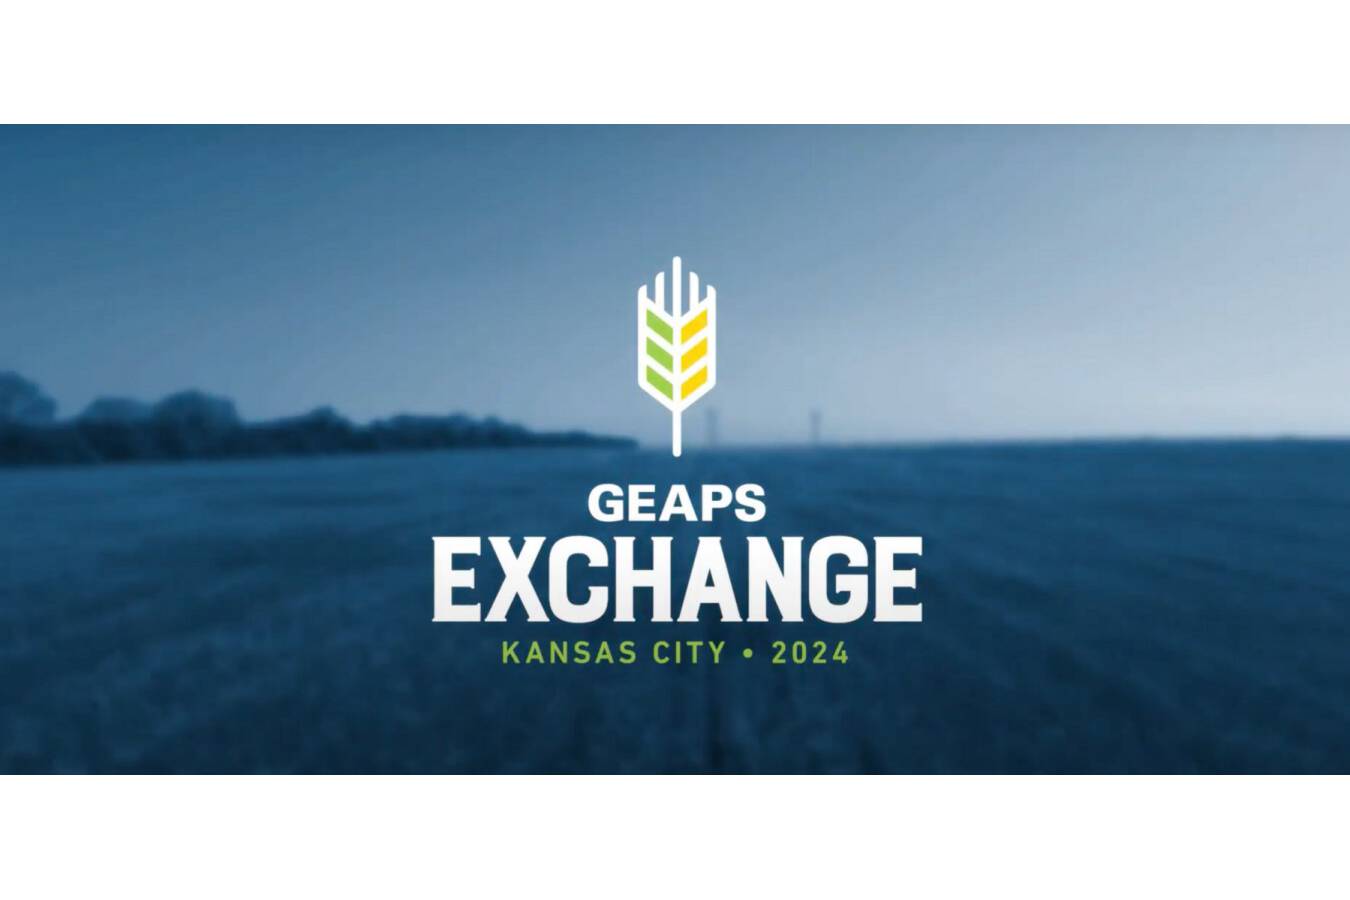 Innovative solutions for conveyor belt problems at GEAPS Exchange ”Scrapetec made a successful debut at GEAPS Exchange 2024, the largest grain handling event, where they presented innovative products to address common conveyor belt challenges. The company’s participation resulted in numerous future projects.”